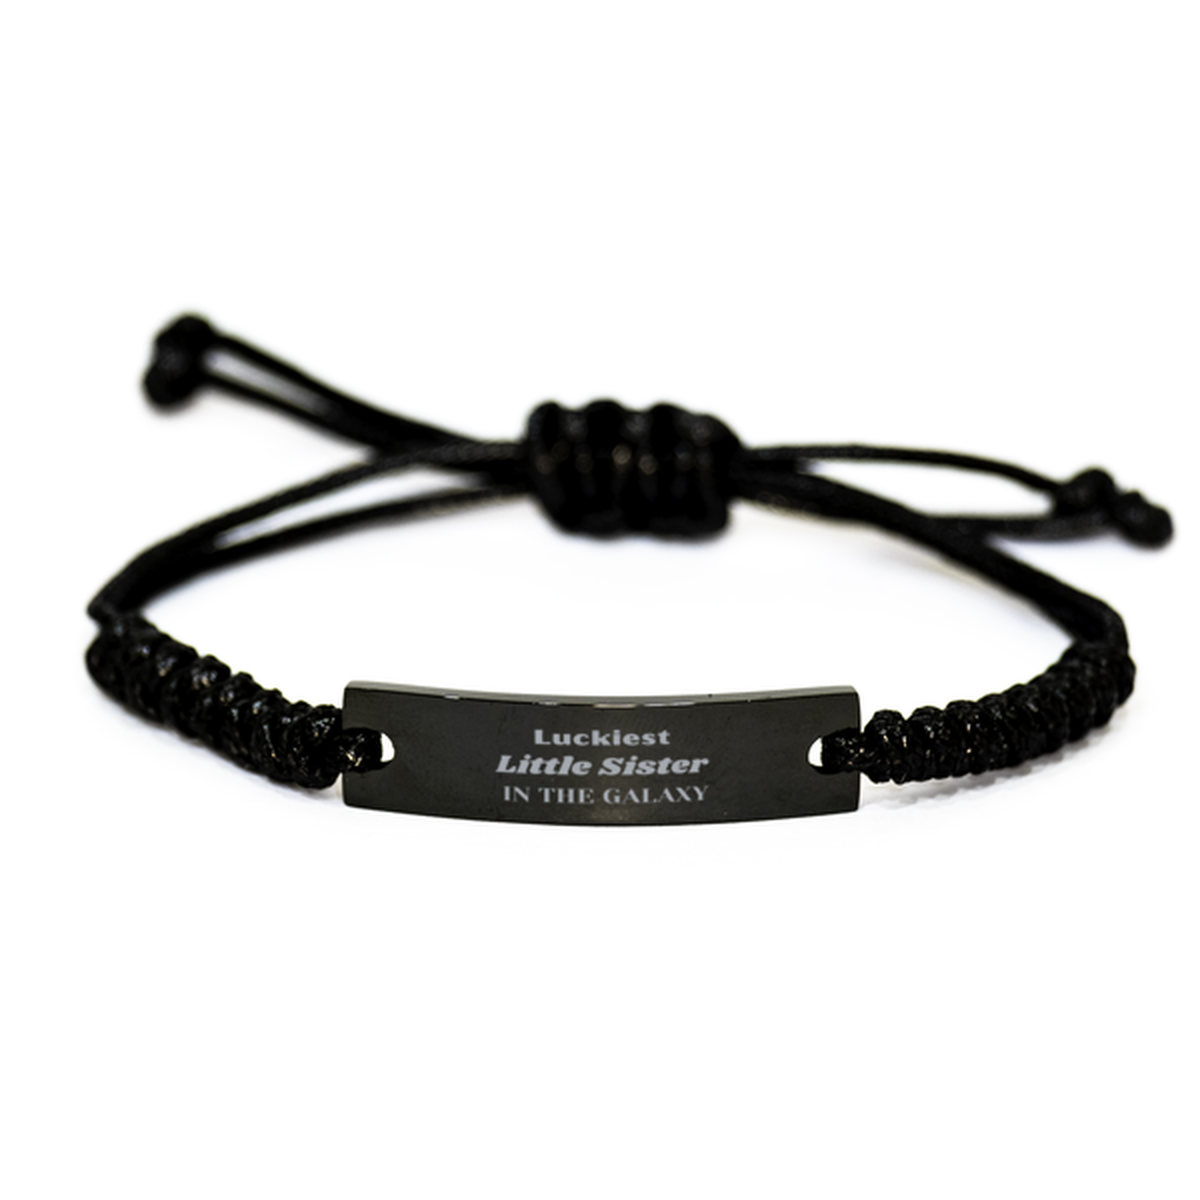 Luckiest Little Sister in the Galaxy, To My Little Sister Engraved Gifts, Christmas Little Sister Black Rope Bracelet Gifts, X-mas Birthday Unique Gifts For Little Sister Men Women